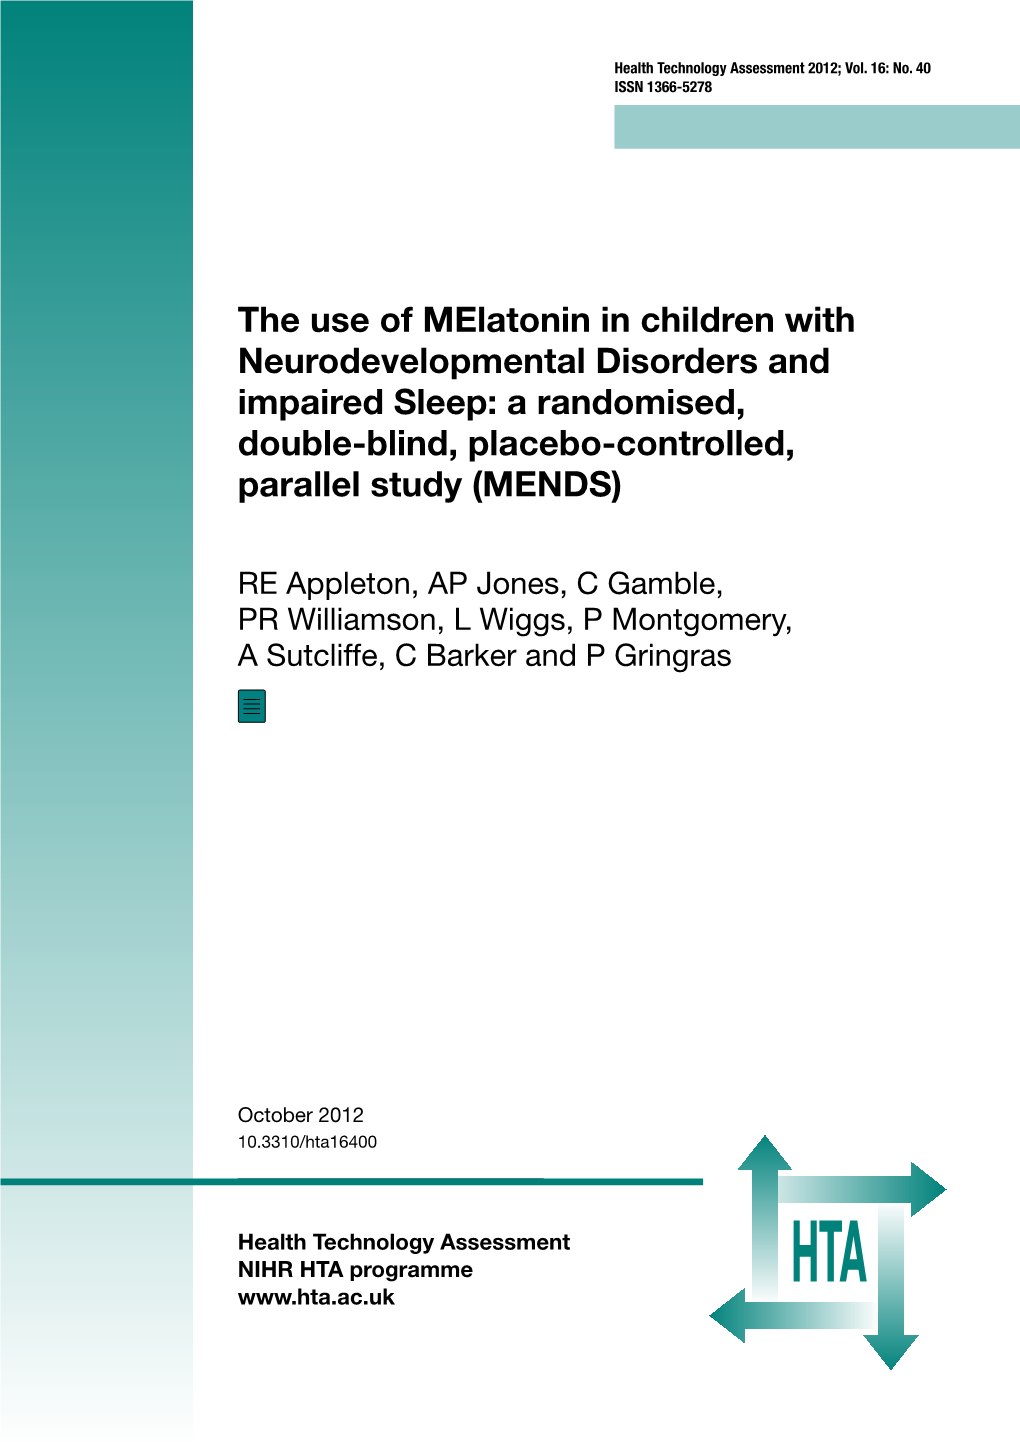 The Use of Melatonin in Children with Neurodevelopmental Disorders and Impaired Sleep: a Randomised, Double-Blind, Placebo-Controlled, Parallel Study (MENDS)